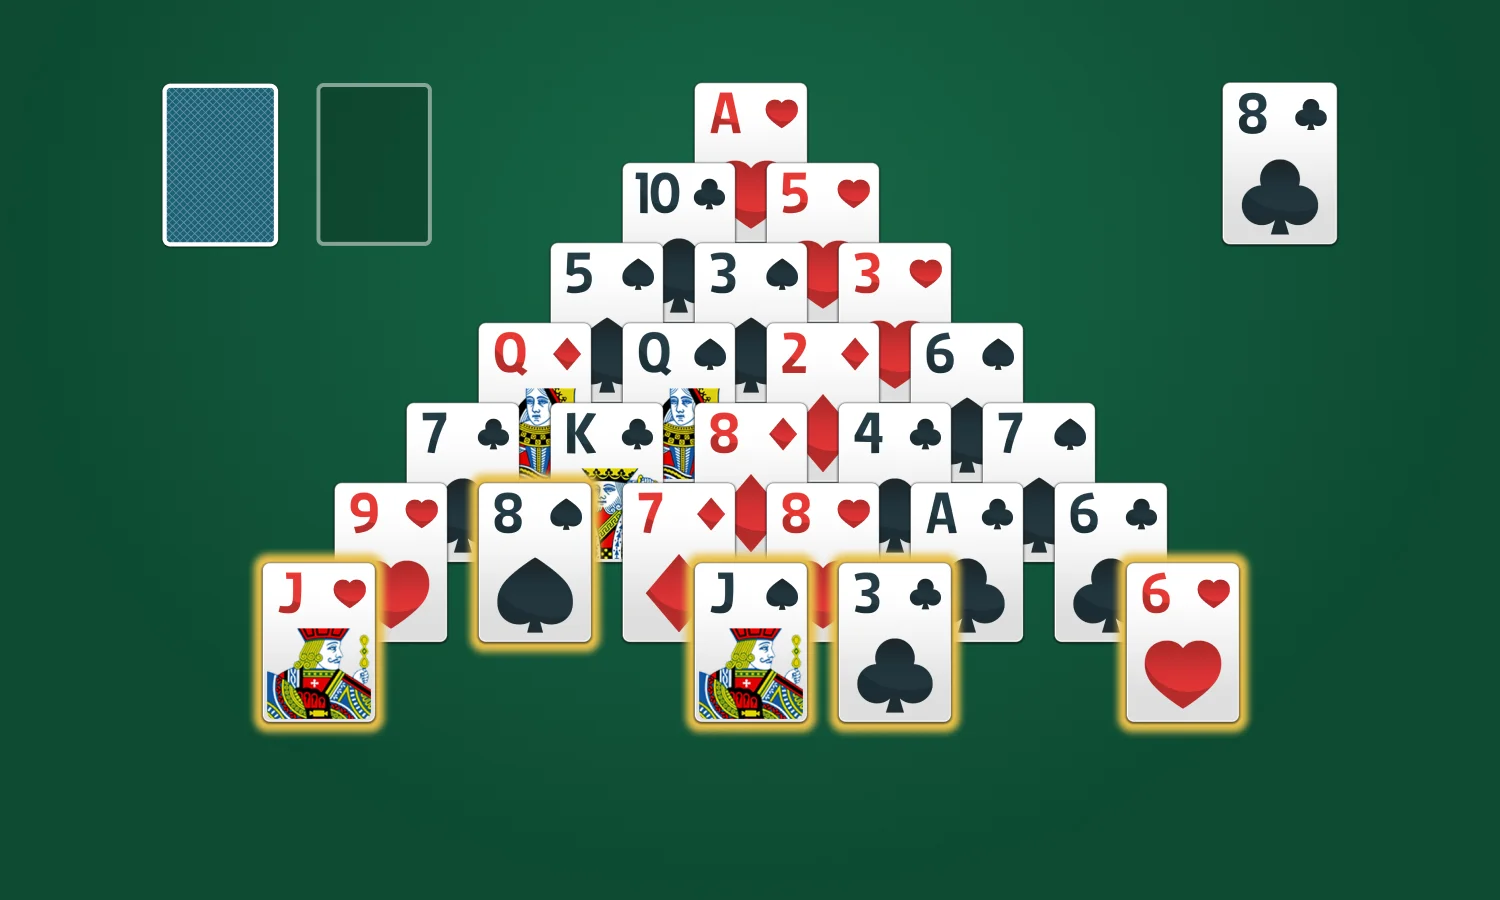 Pyramid Solitaire Rules: Step 1